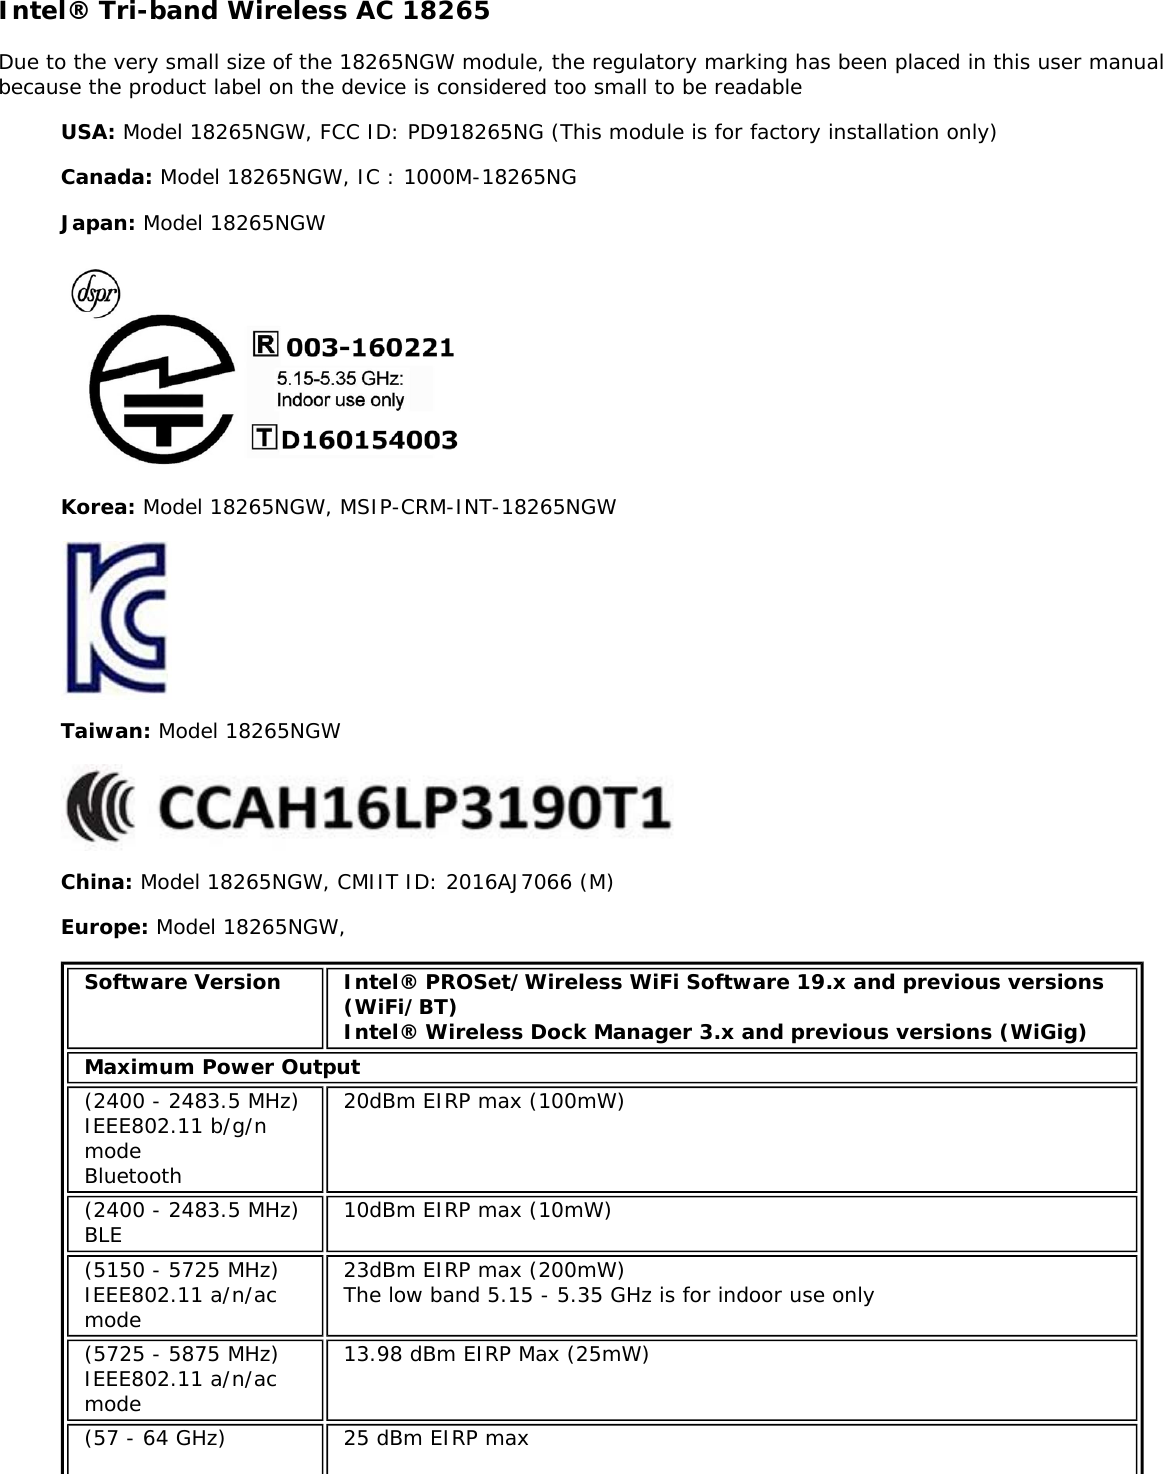 Intel® Tri-band Wireless AC 18265Due to the very small size of the 18265NGW module, the regulatory marking has been placed in this user manualbecause the product label on the device is considered too small to be readableUSA: Model 18265NGW, FCC ID: PD918265NG (This module is for factory installation only)Canada: Model 18265NGW, IC : 1000M-18265NGJapan: Model 18265NGWKorea: Model 18265NGW, MSIP-CRM-INT-18265NGWTaiwan: Model 18265NGWChina: Model 18265NGW, CMIIT ID: 2016AJ7066 (M)Europe: Model 18265NGW,Software Version Intel® PROSet/Wireless WiFi Software 19.x and previous versions(WiFi/BT)Intel® Wireless Dock Manager 3.x and previous versions (WiGig)Maximum Power Output(2400 - 2483.5 MHz)IEEE802.11 b/g/nmodeBluetooth20dBm EIRP max (100mW)(2400 - 2483.5 MHz)BLE 10dBm EIRP max (10mW)(5150 - 5725 MHz)IEEE802.11 a/n/acmode23dBm EIRP max (200mW)The low band 5.15 - 5.35 GHz is for indoor use only(5725 - 5875 MHz)IEEE802.11 a/n/acmode13.98 dBm EIRP Max (25mW)(57 - 64 GHz) 25 dBm EIRP max